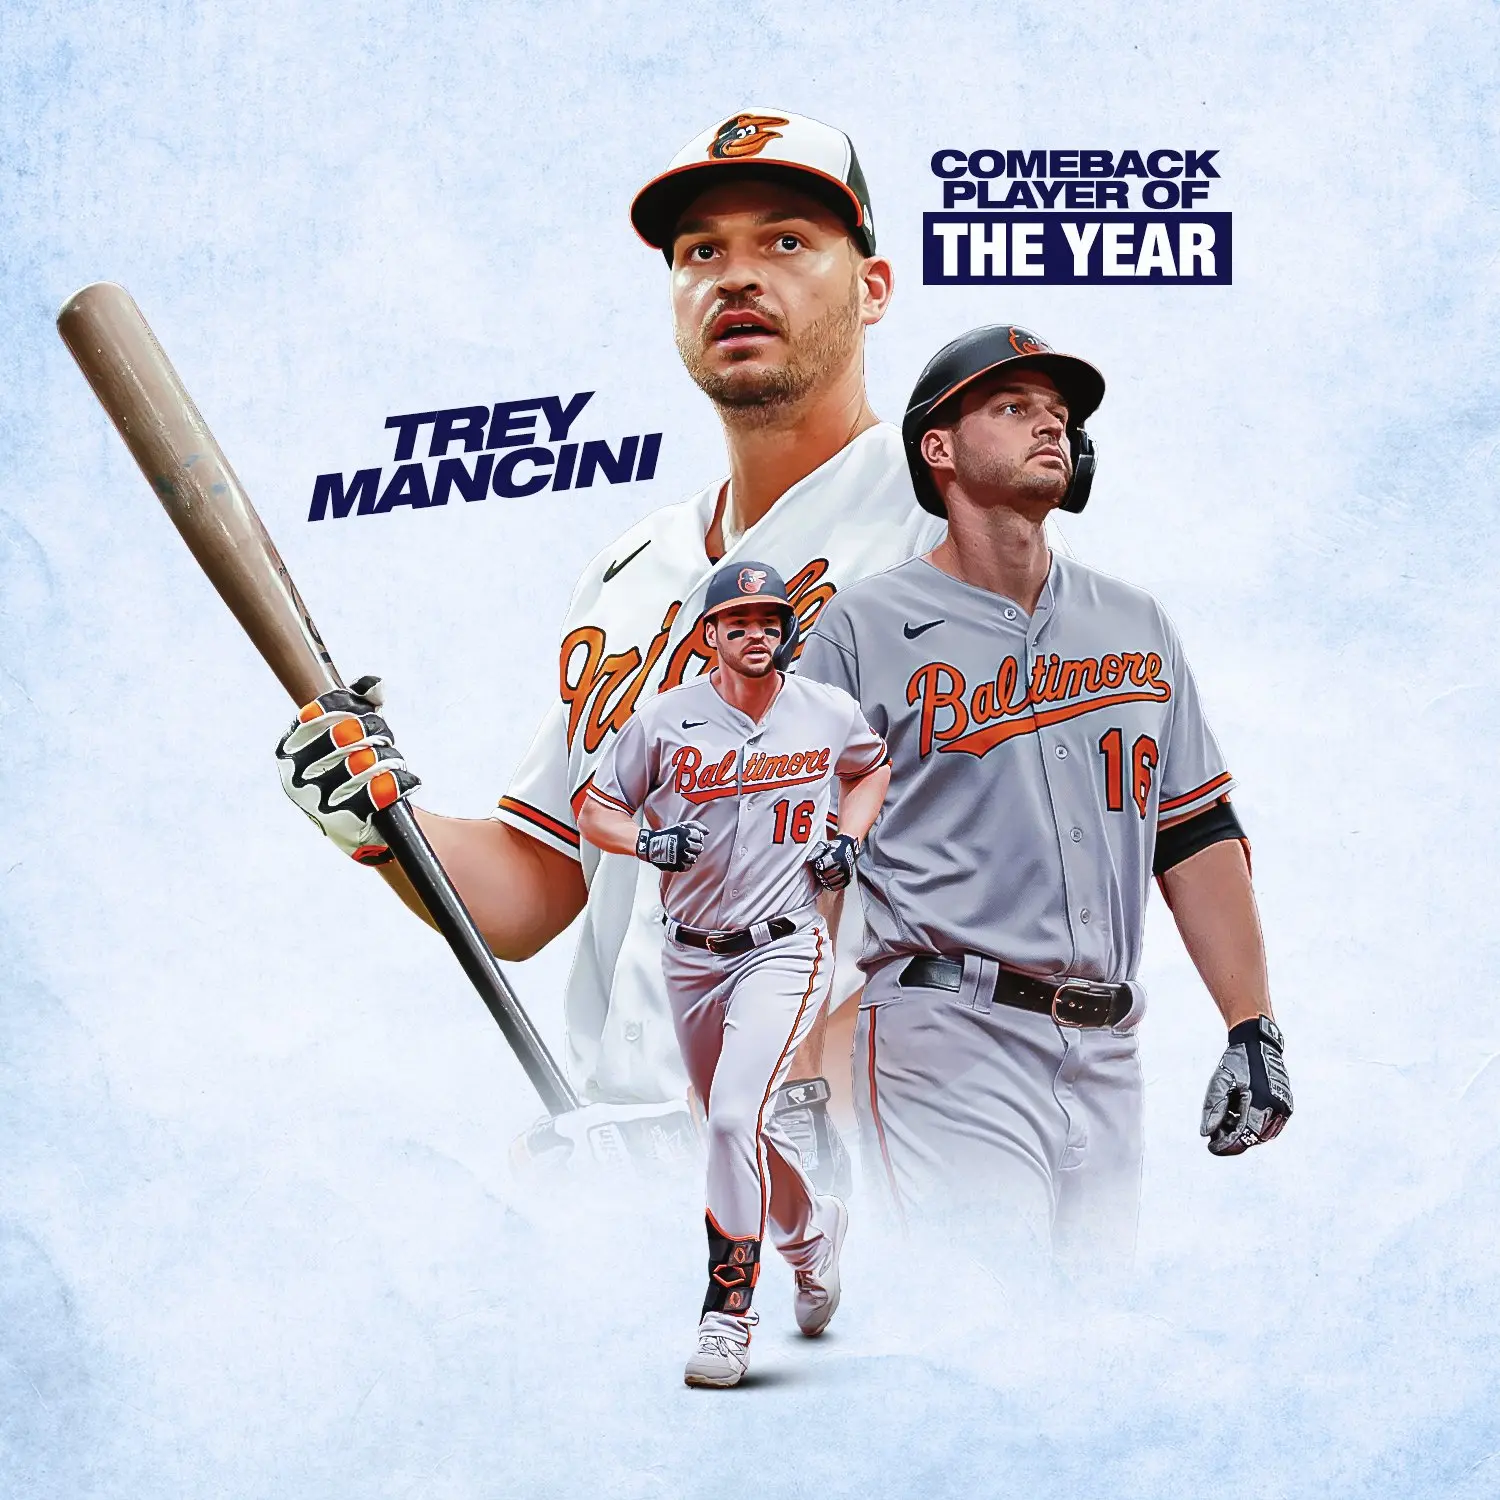 Posey e Mancini vencem Comeback Player Of The Year